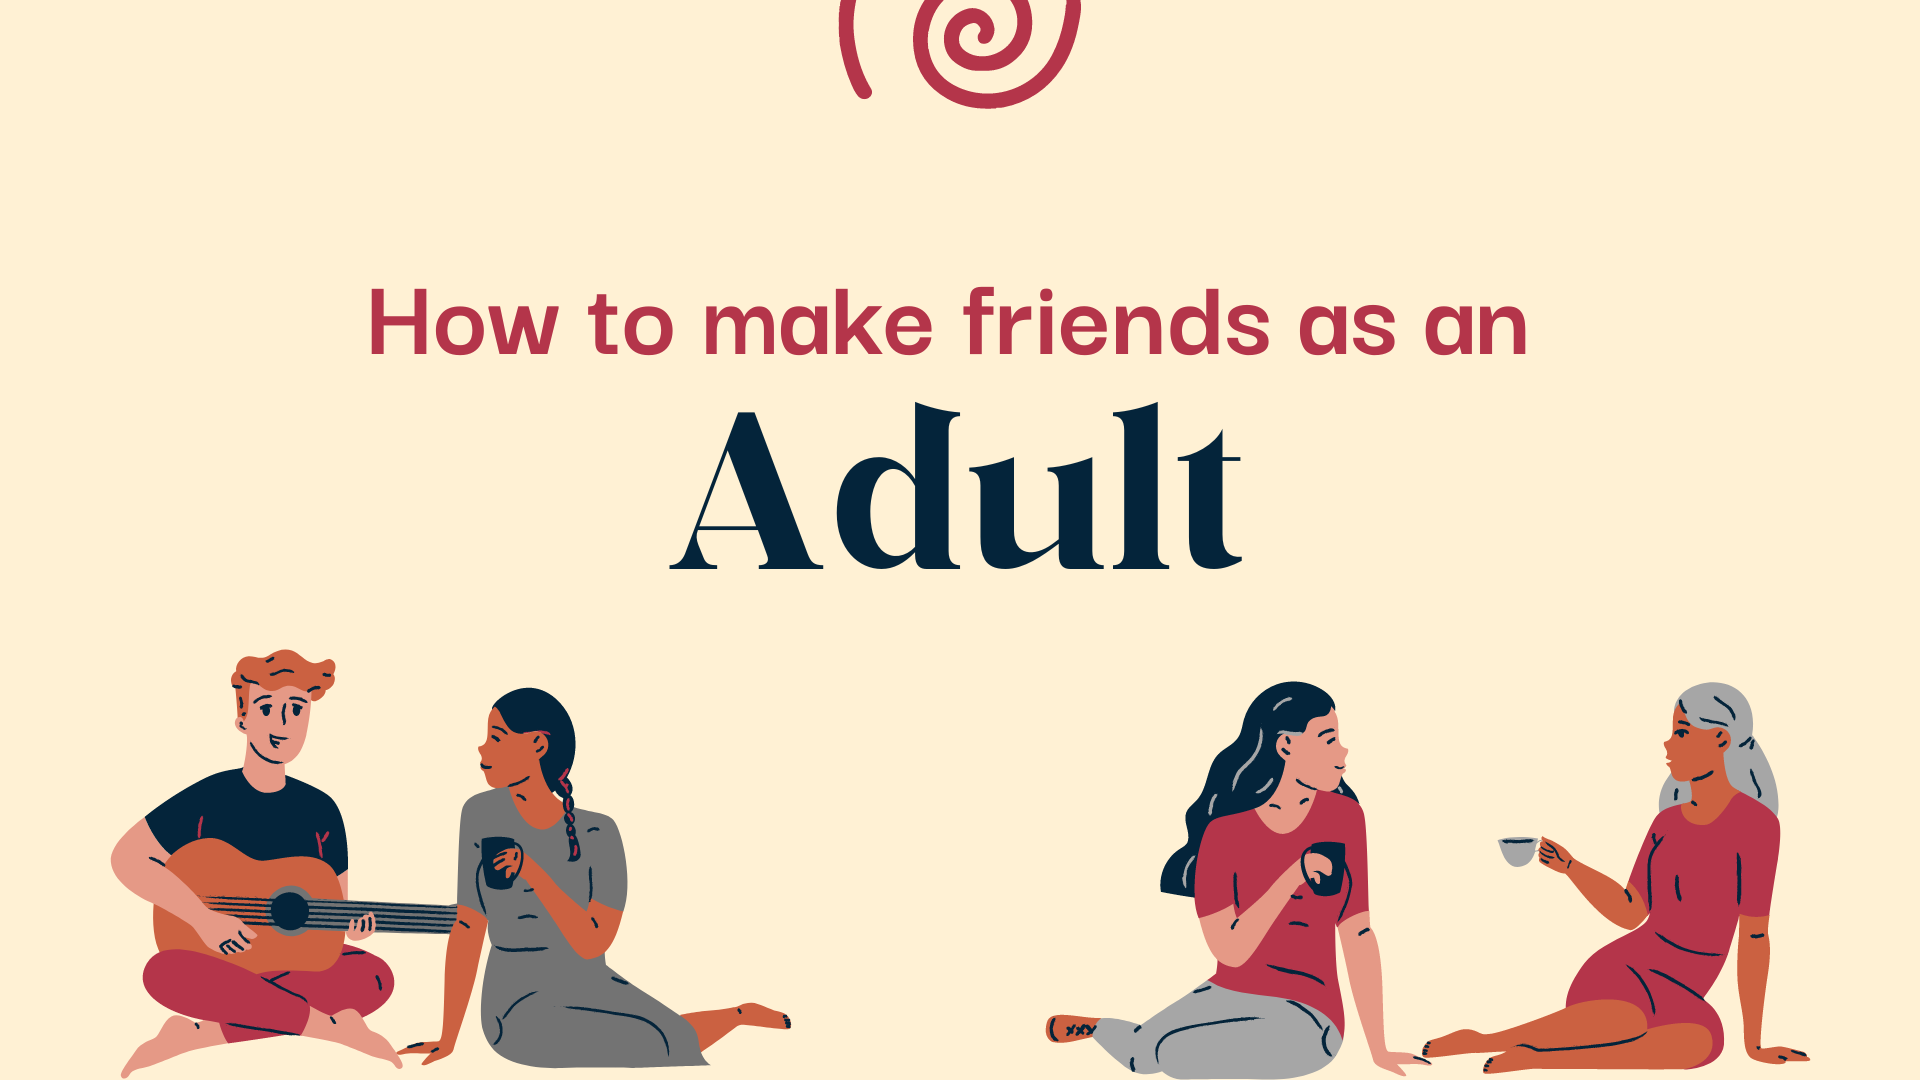 How to make friends as an adult - Deseret News